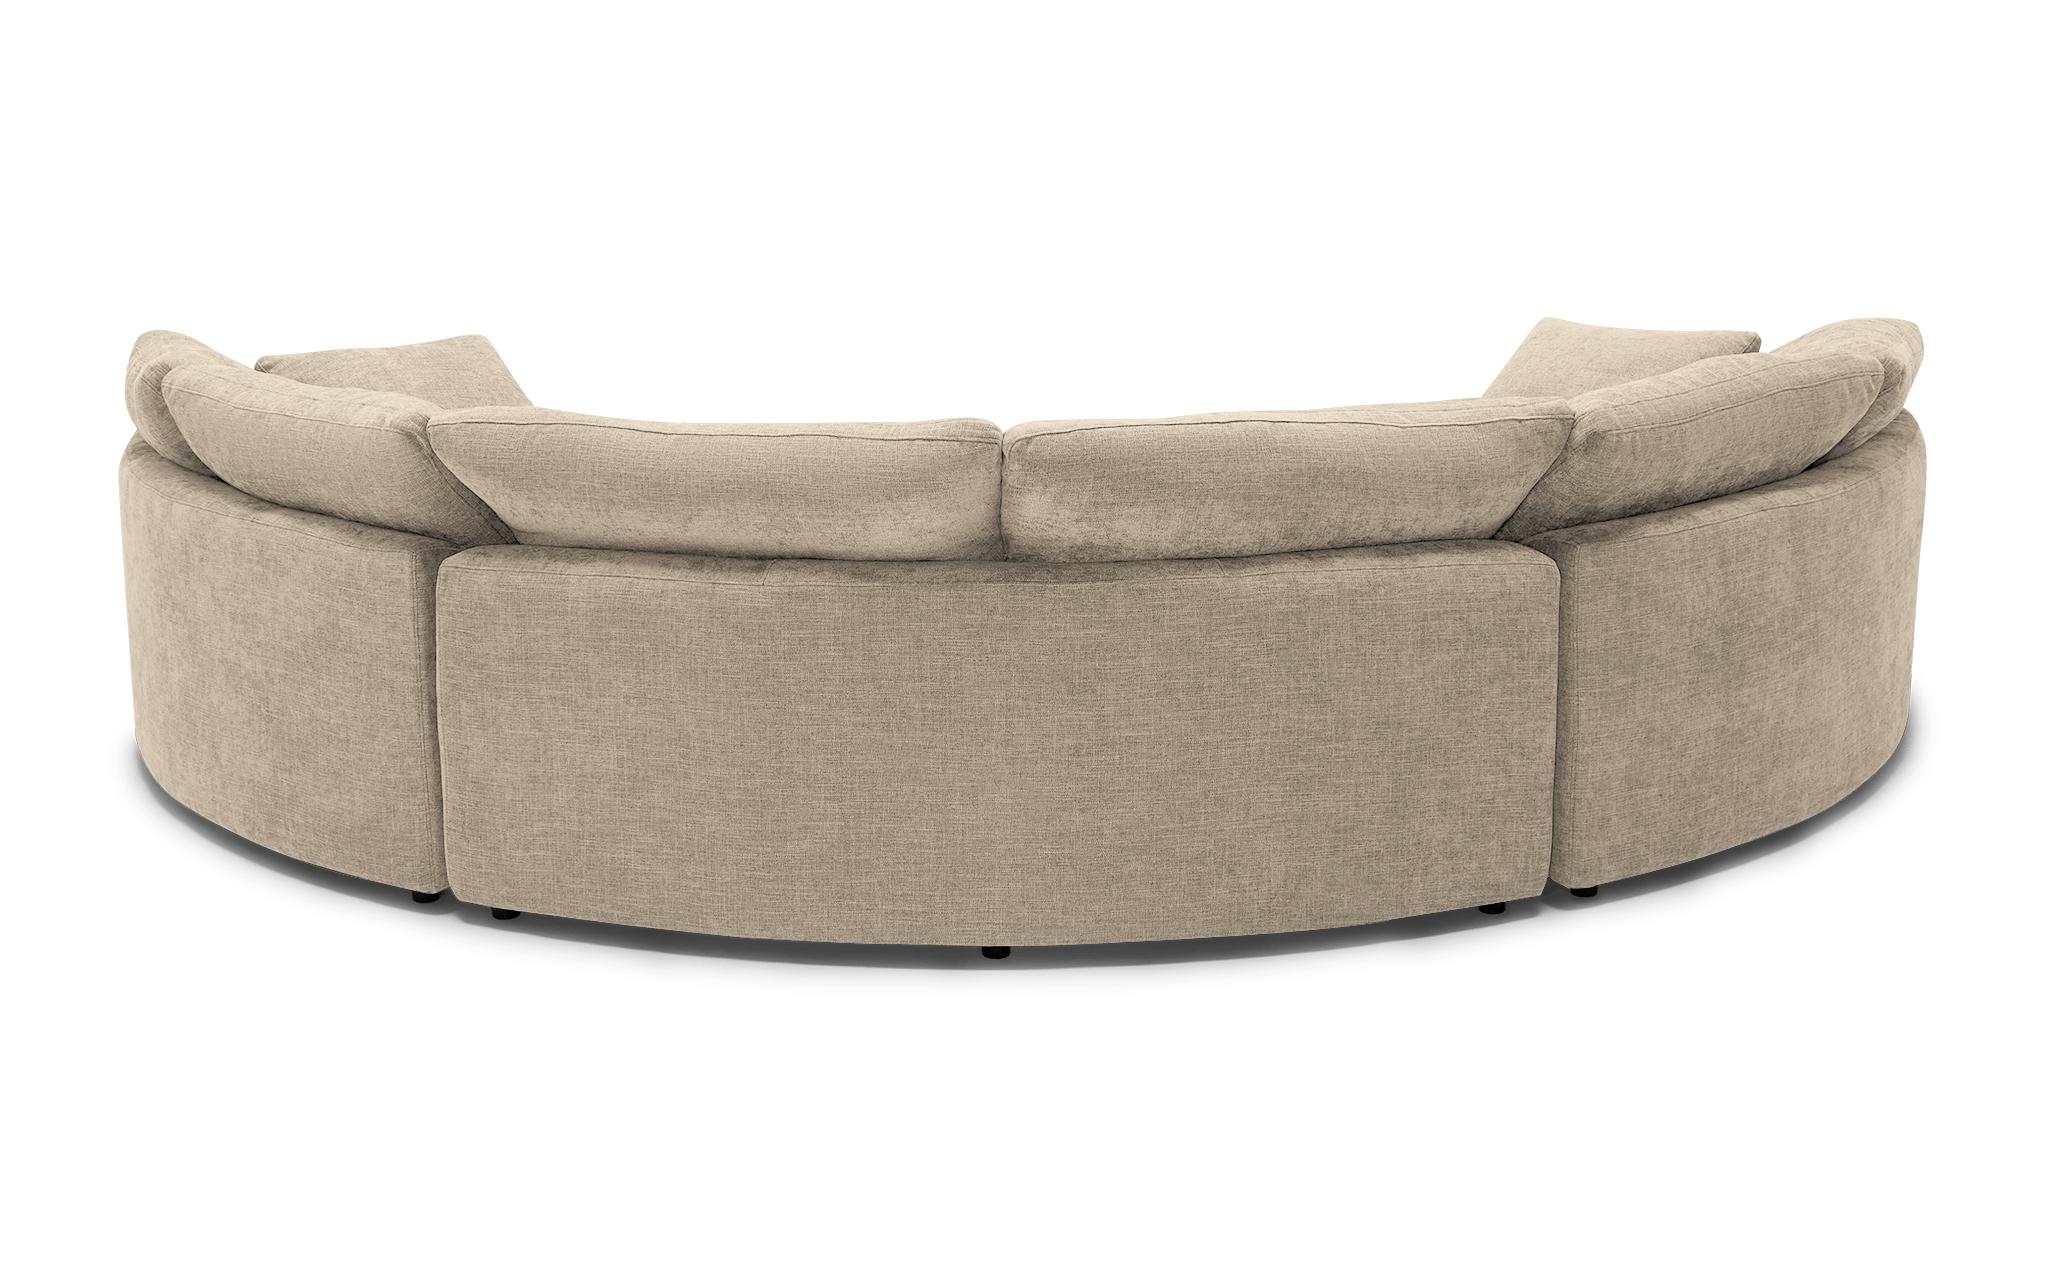 Beige/White Bryant Mid Century Modern Semicircle Sectional (3 Piece) - Cody Sandstone - Image 4